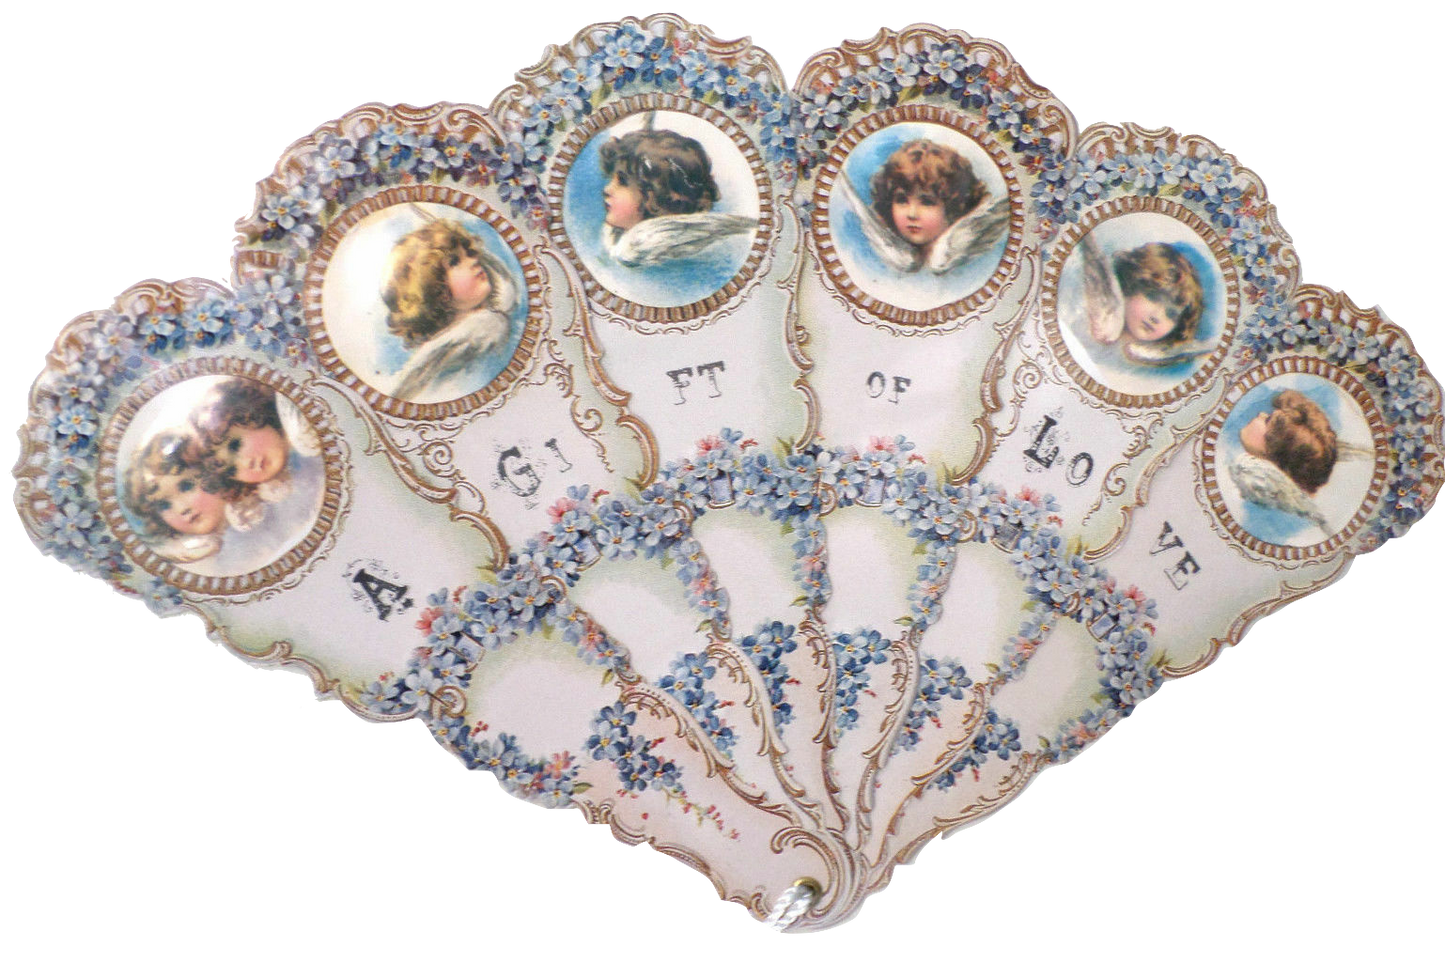 Antique Victorian Fan - A Gift of Love